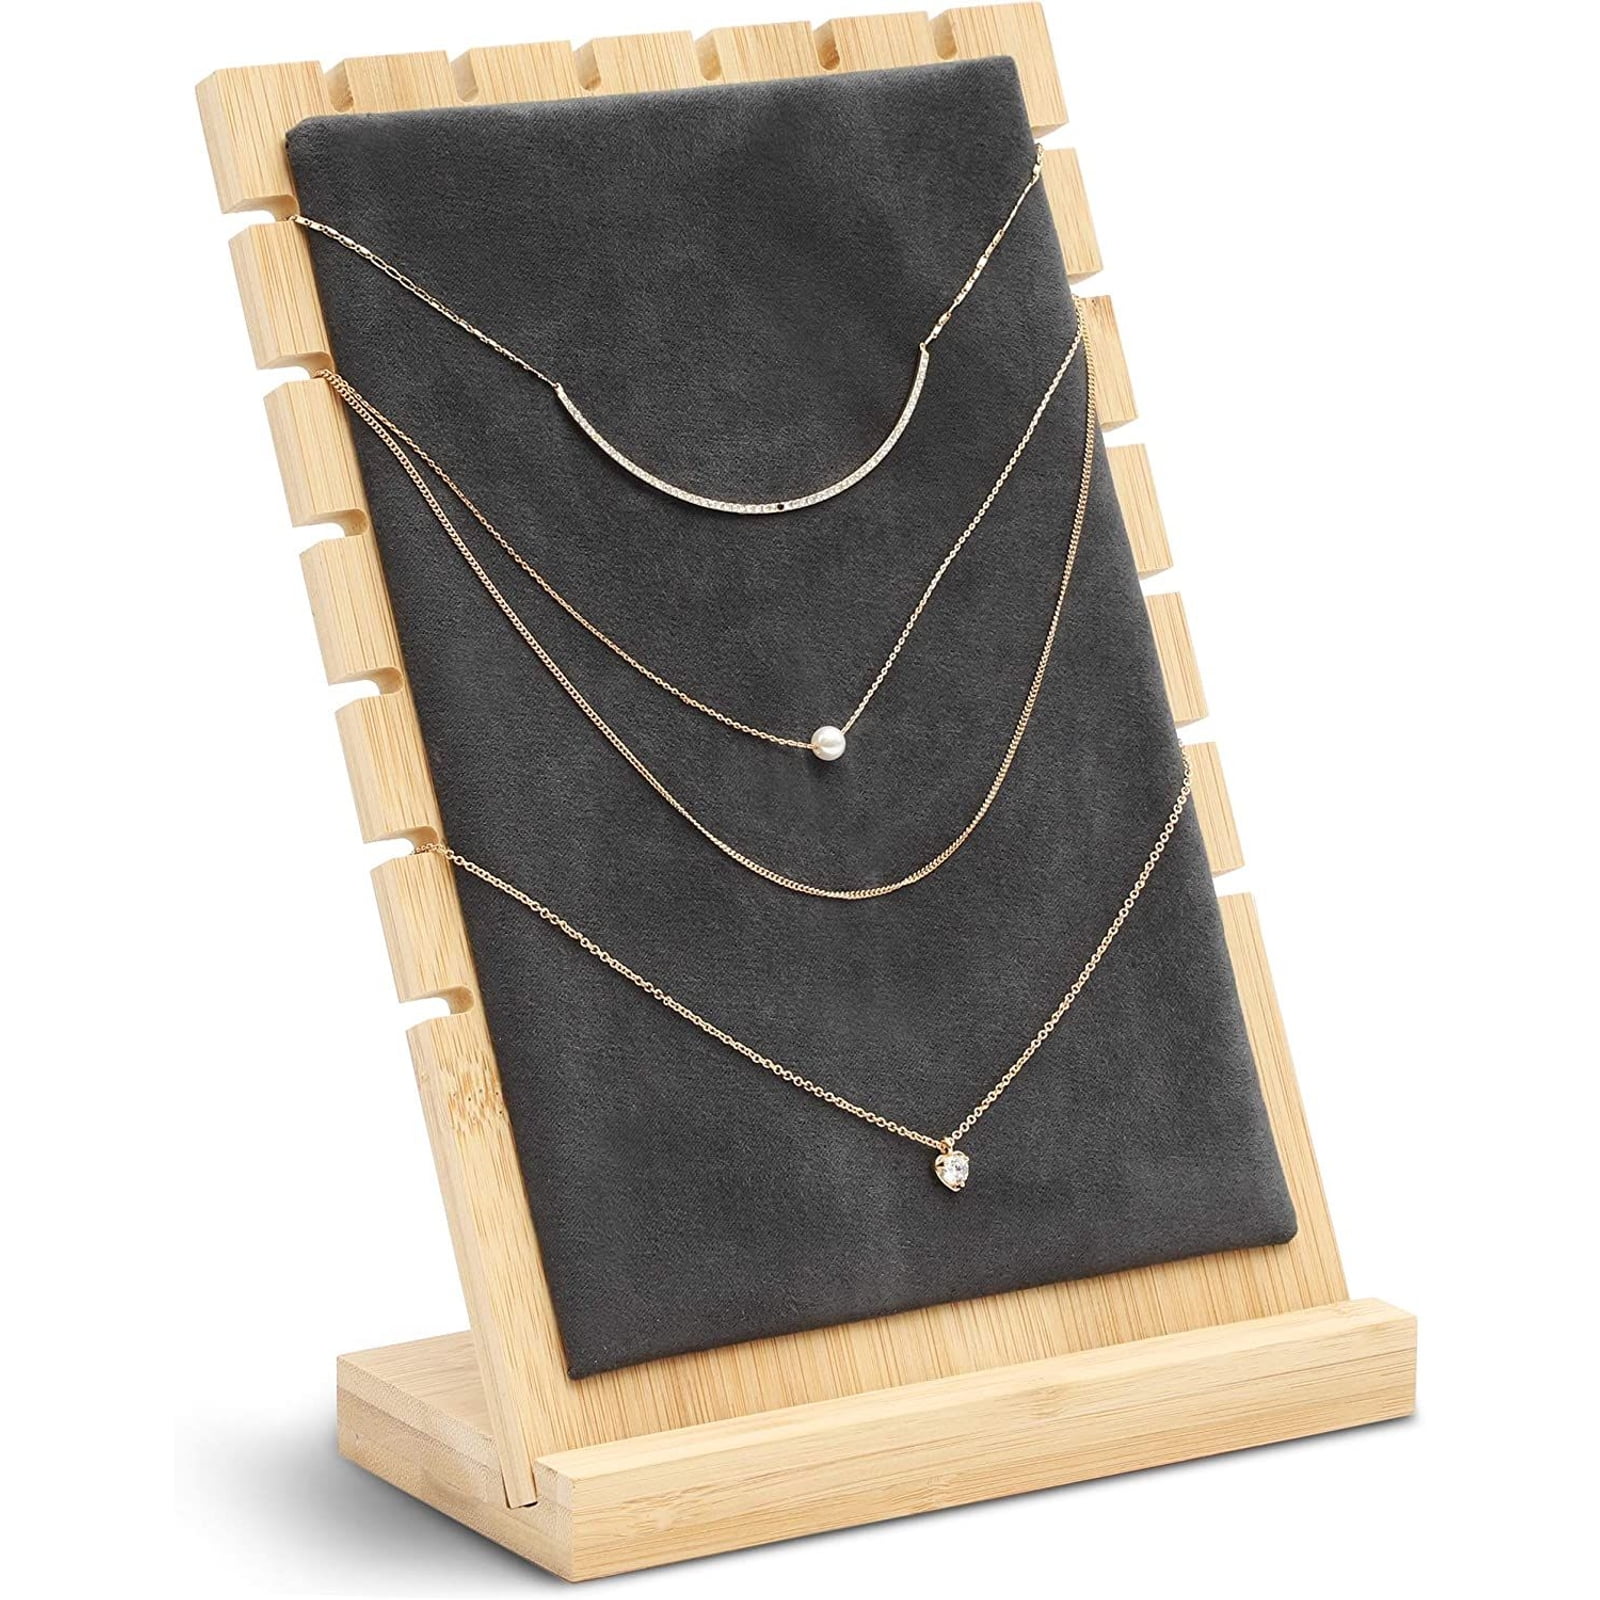 Bamboo Necklace Jewelry Tabletop Display Plate Holder for Store Retail Shop DIY 